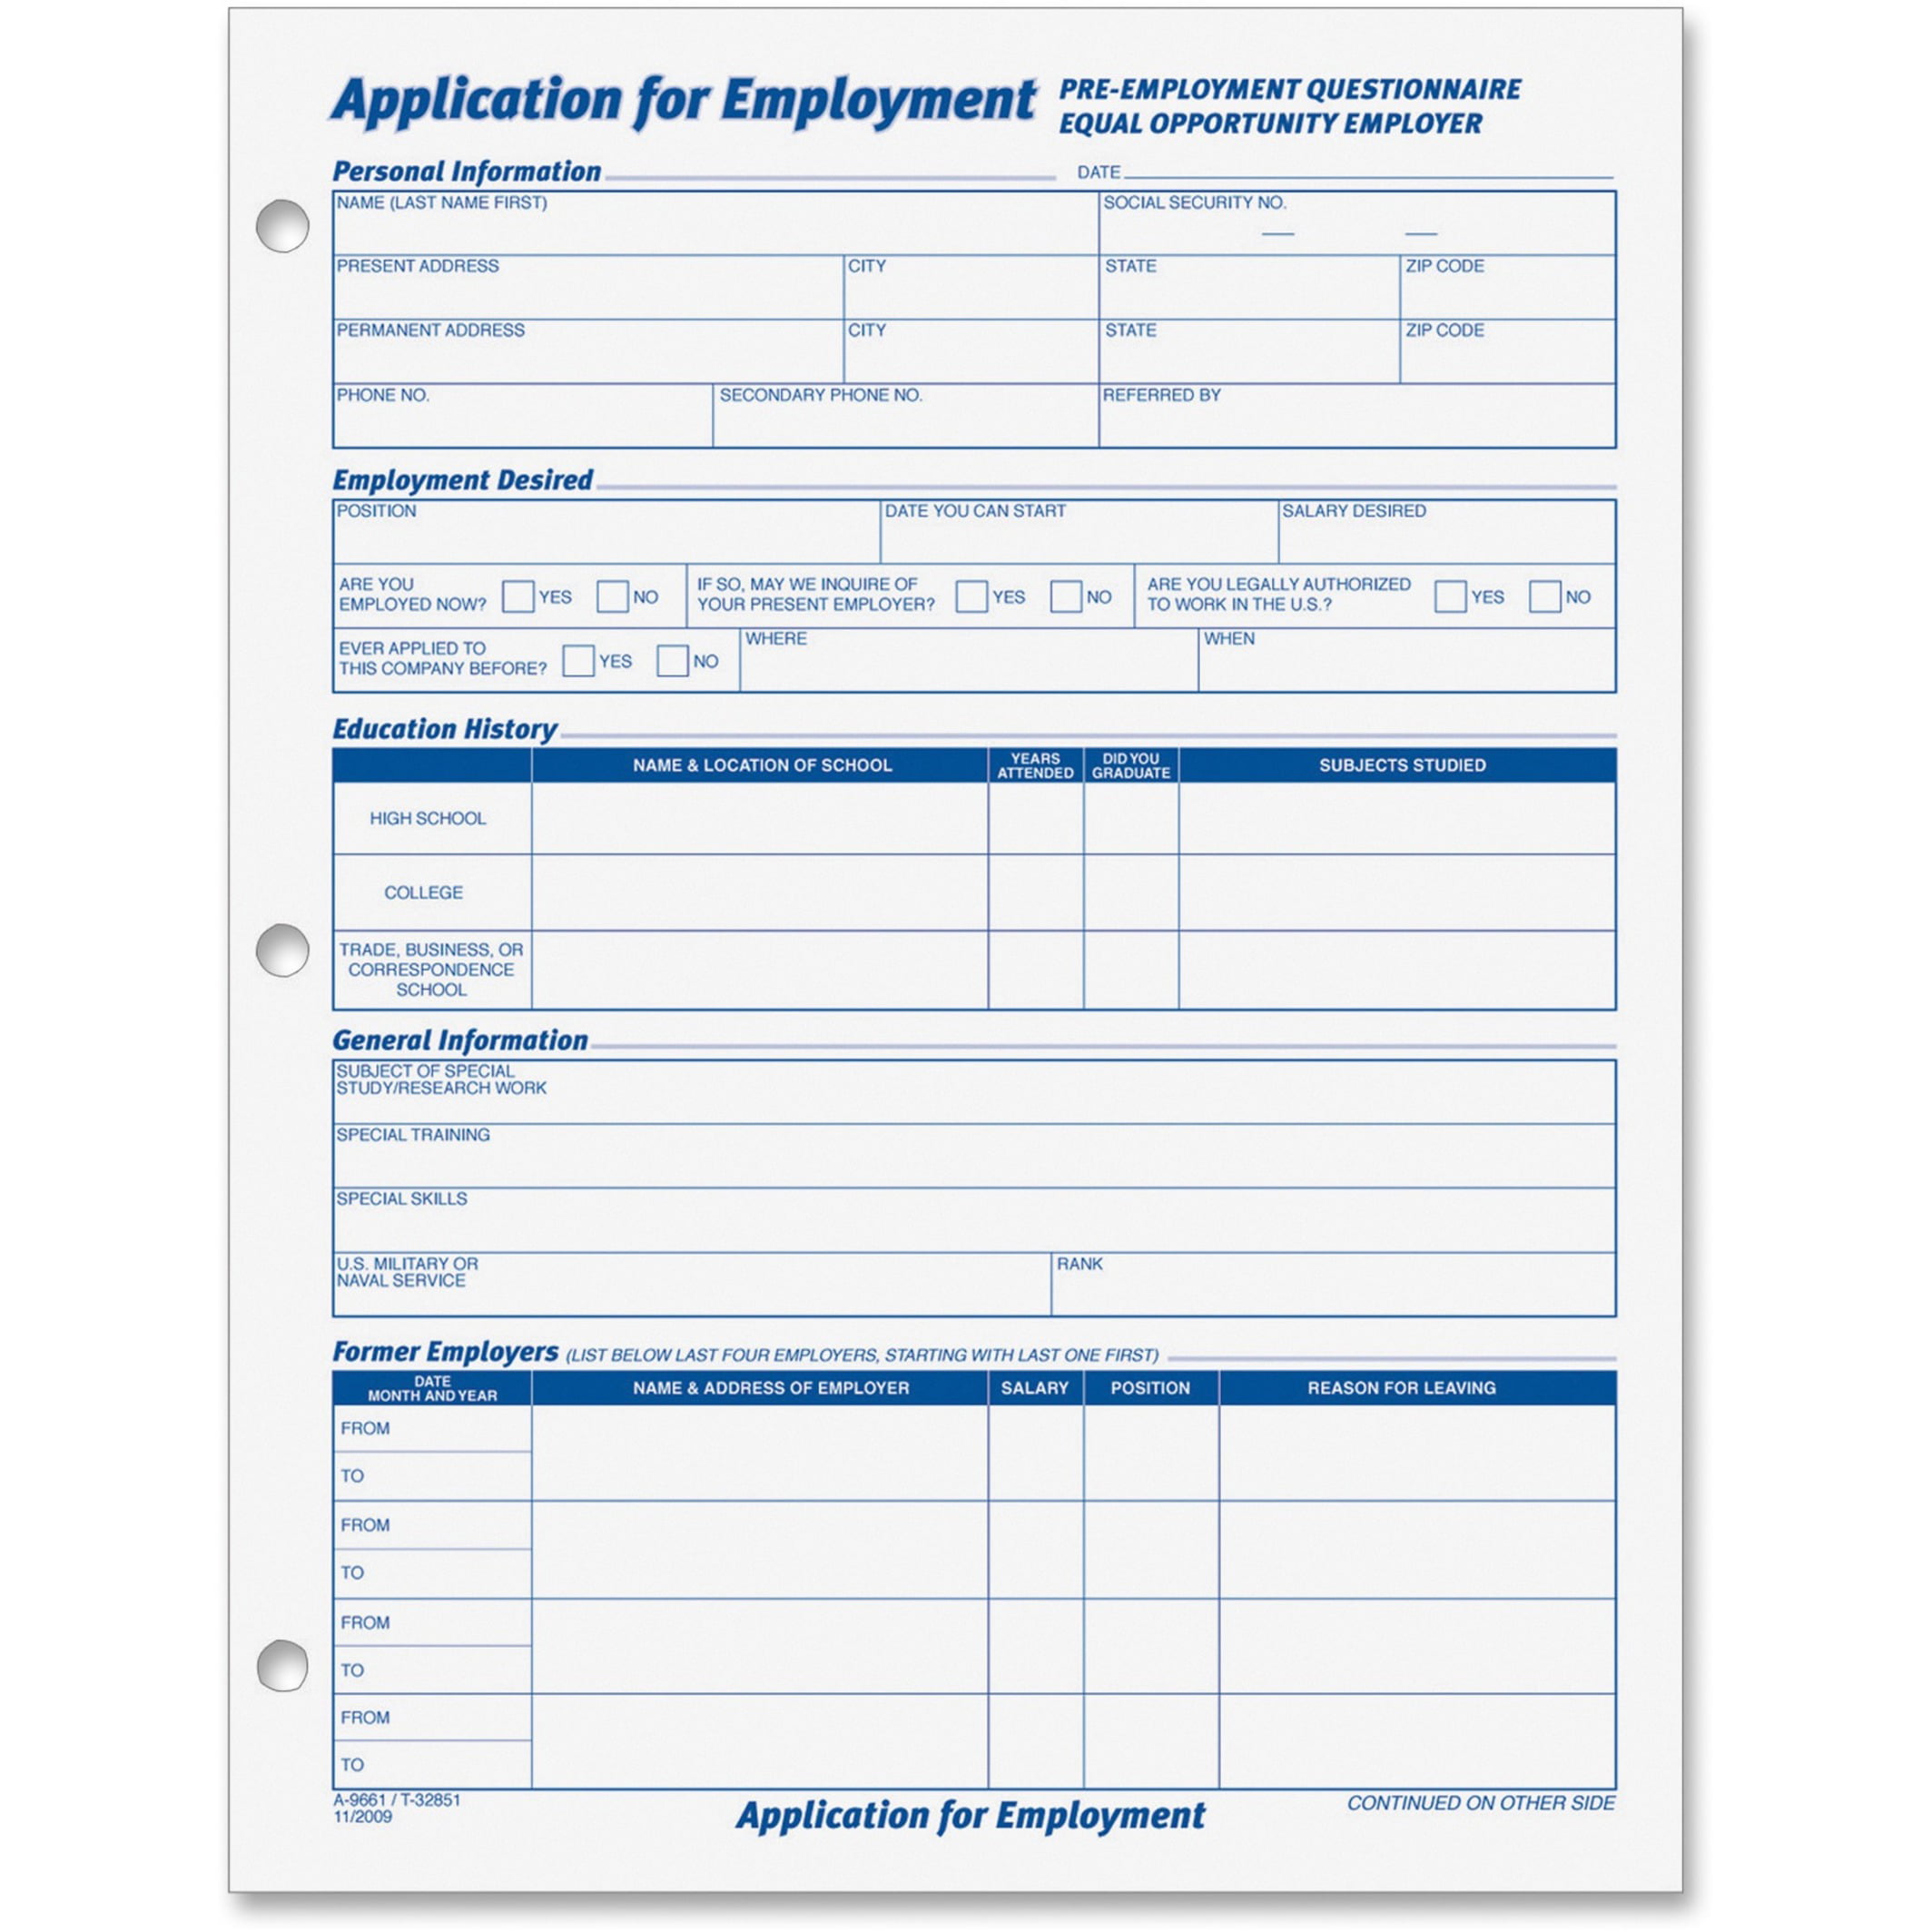 8-3/8 x 11 Tops 32851 Employee Application Form 50 Forms/Pad 2 Pads/Pack 